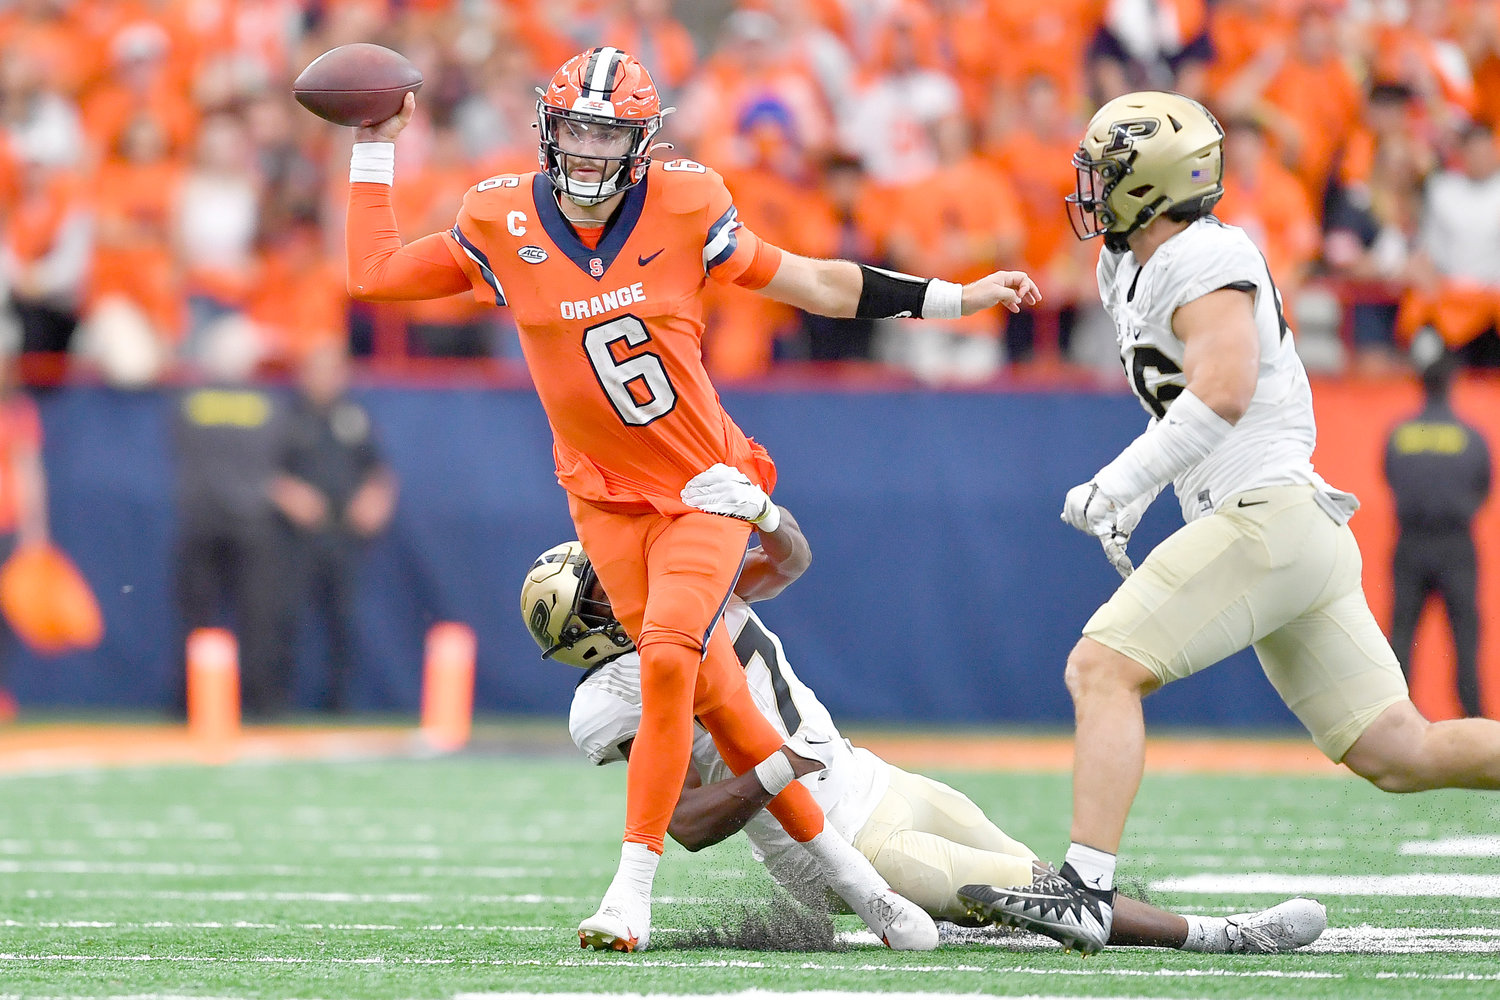 Syracuse quarterback Garrett Shrader, left, throws the ball while pressured by Purdue safety Chris Jefferson during Saturday’s non-league game in Syracuse. The Orange won 32-29.